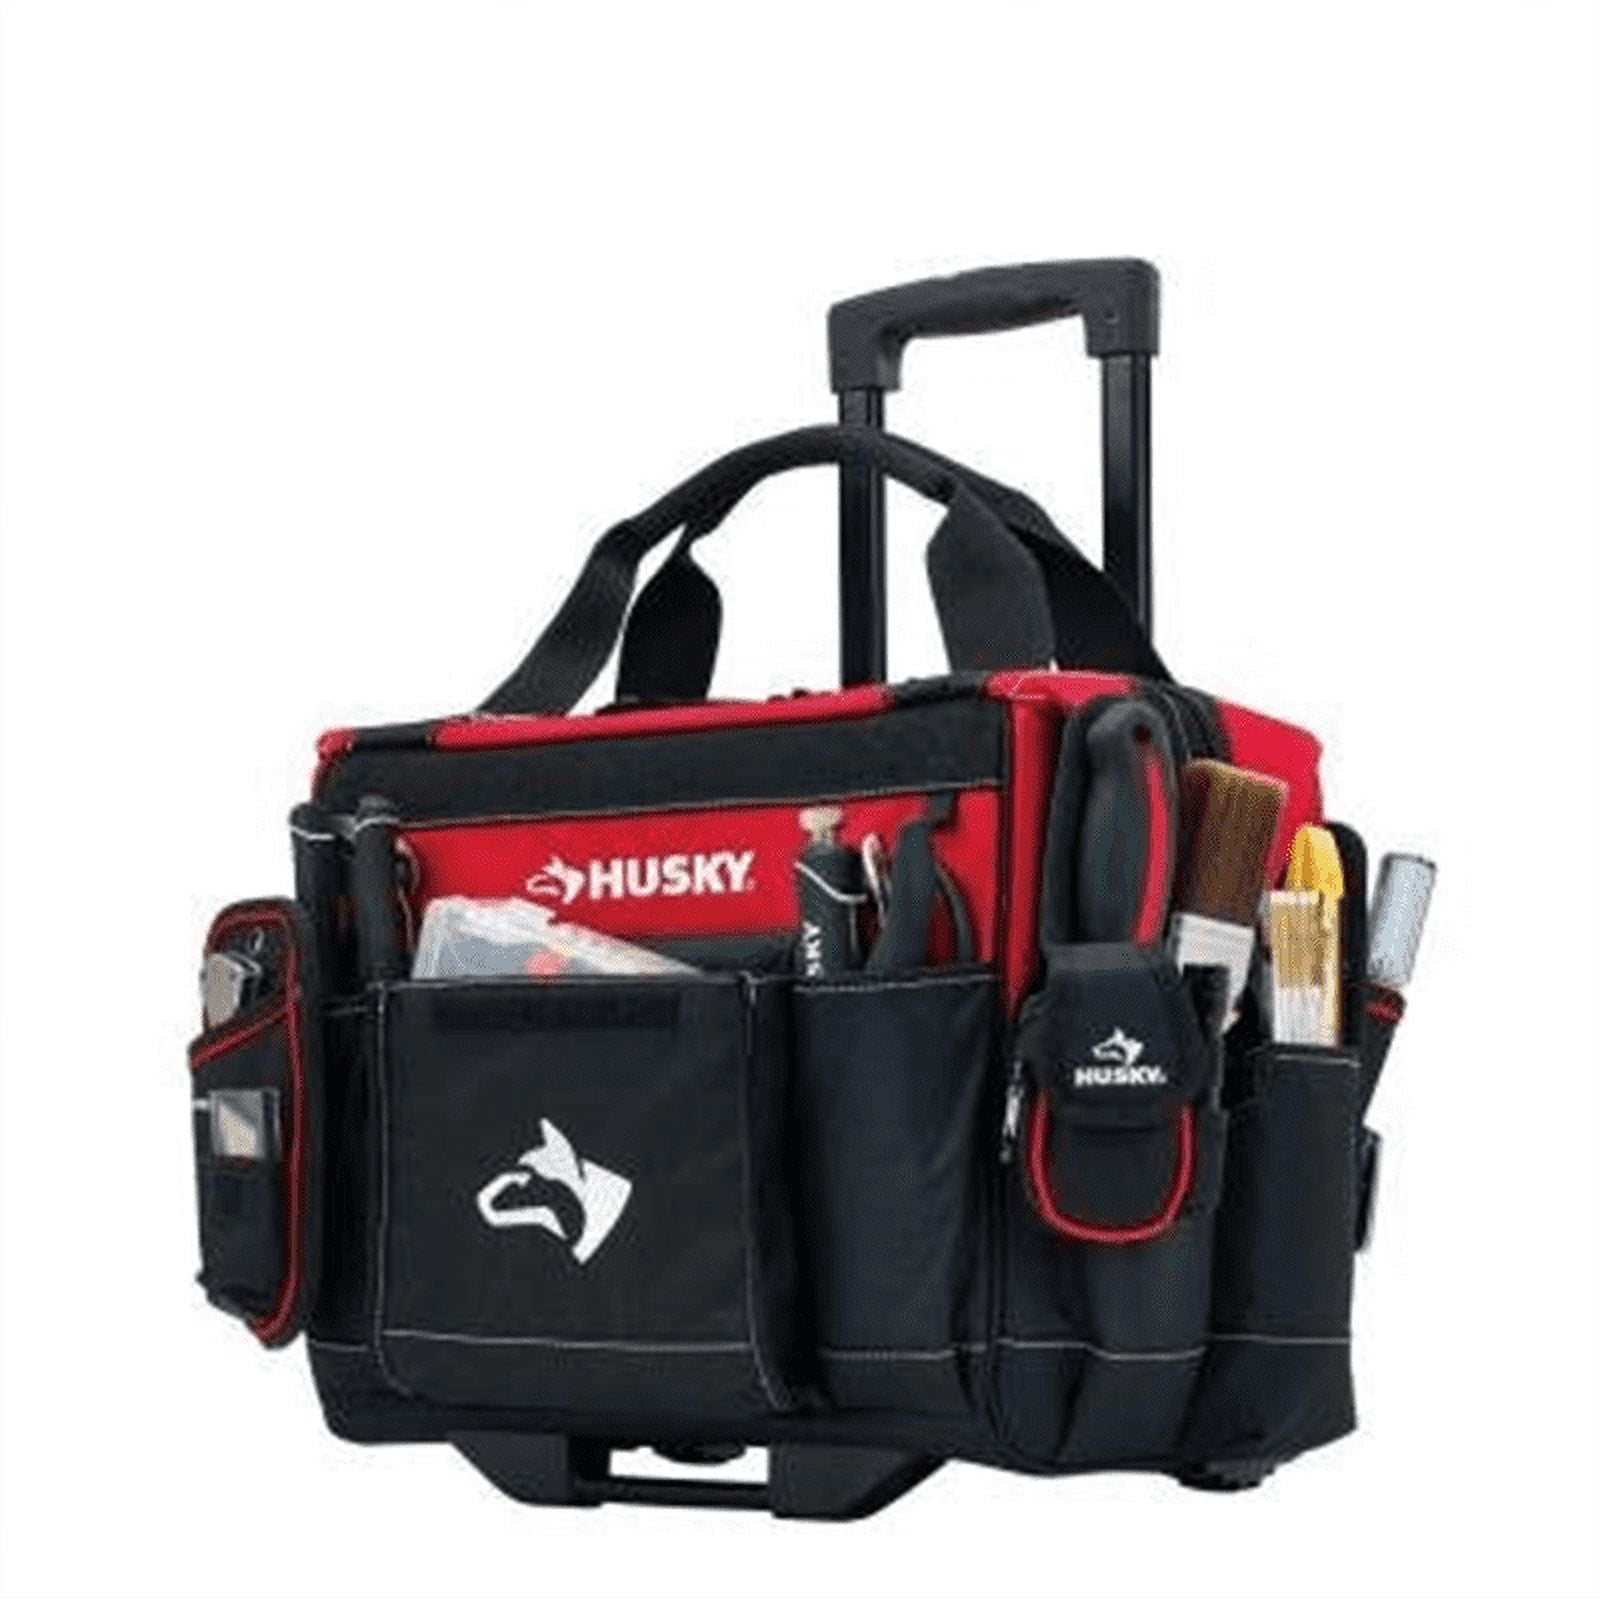 Husky Tools 14 Large Mouth Tool Bag is a Winner in my Book. Husky